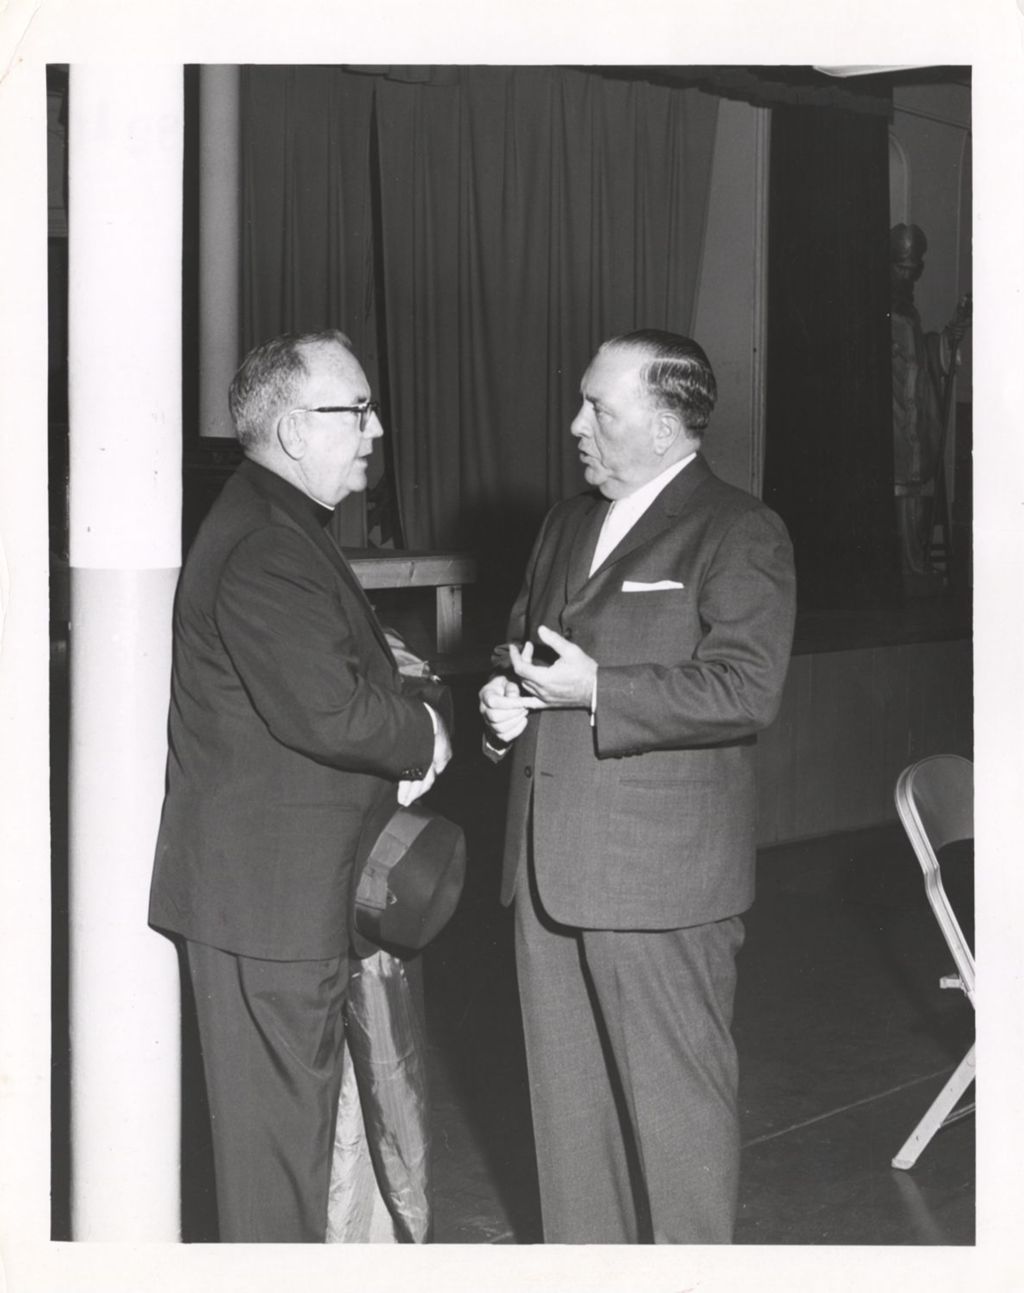 Richard J. Daley speaking with a priest